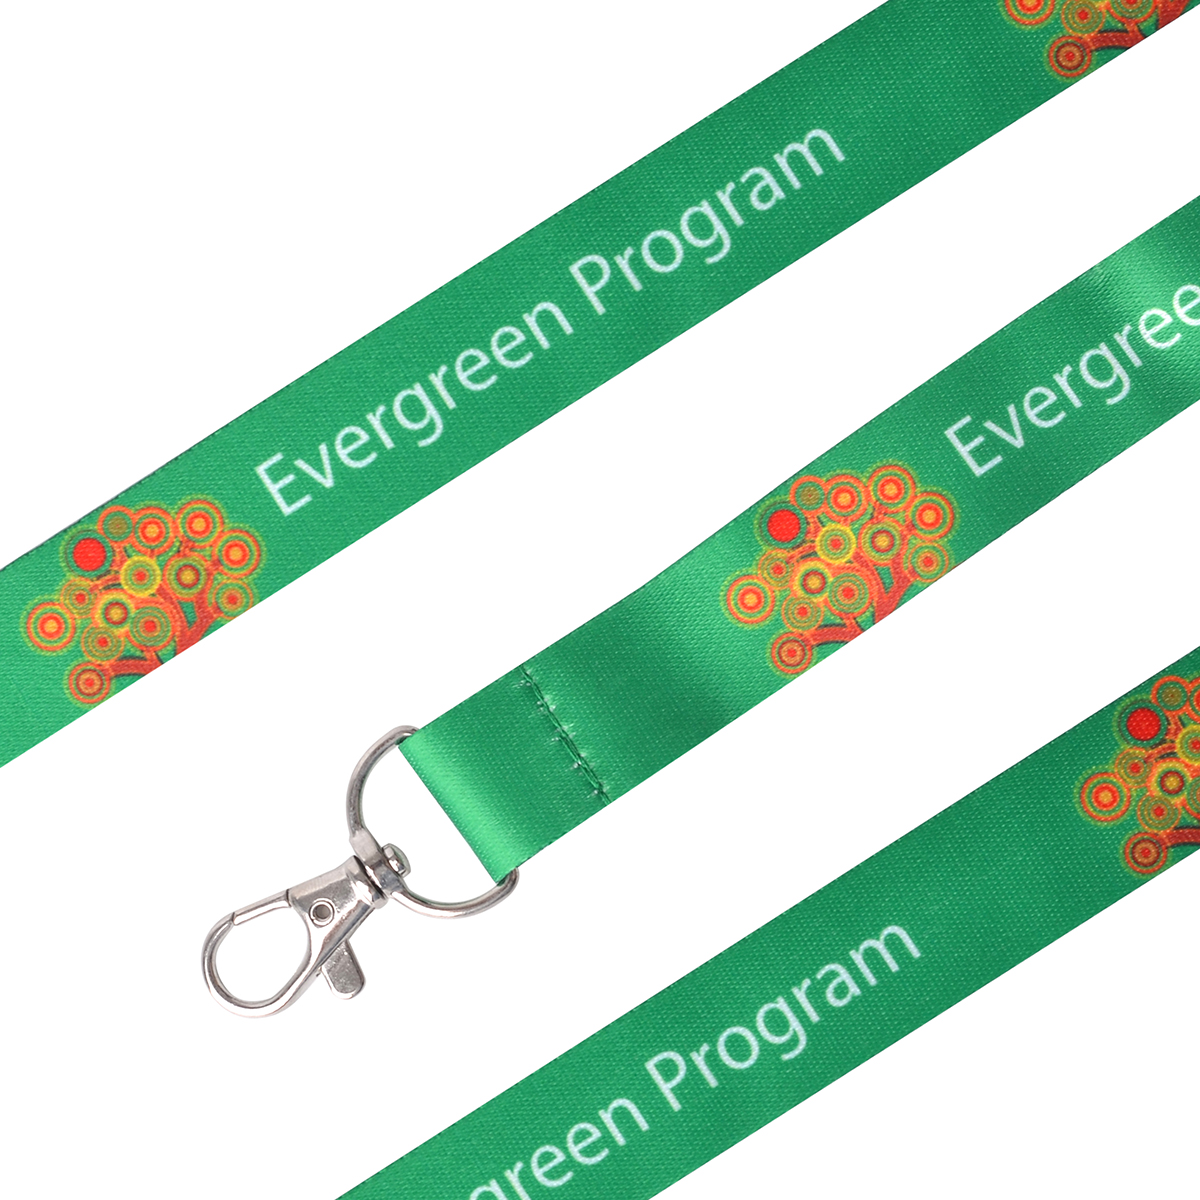 elevate lanyard with printed brand